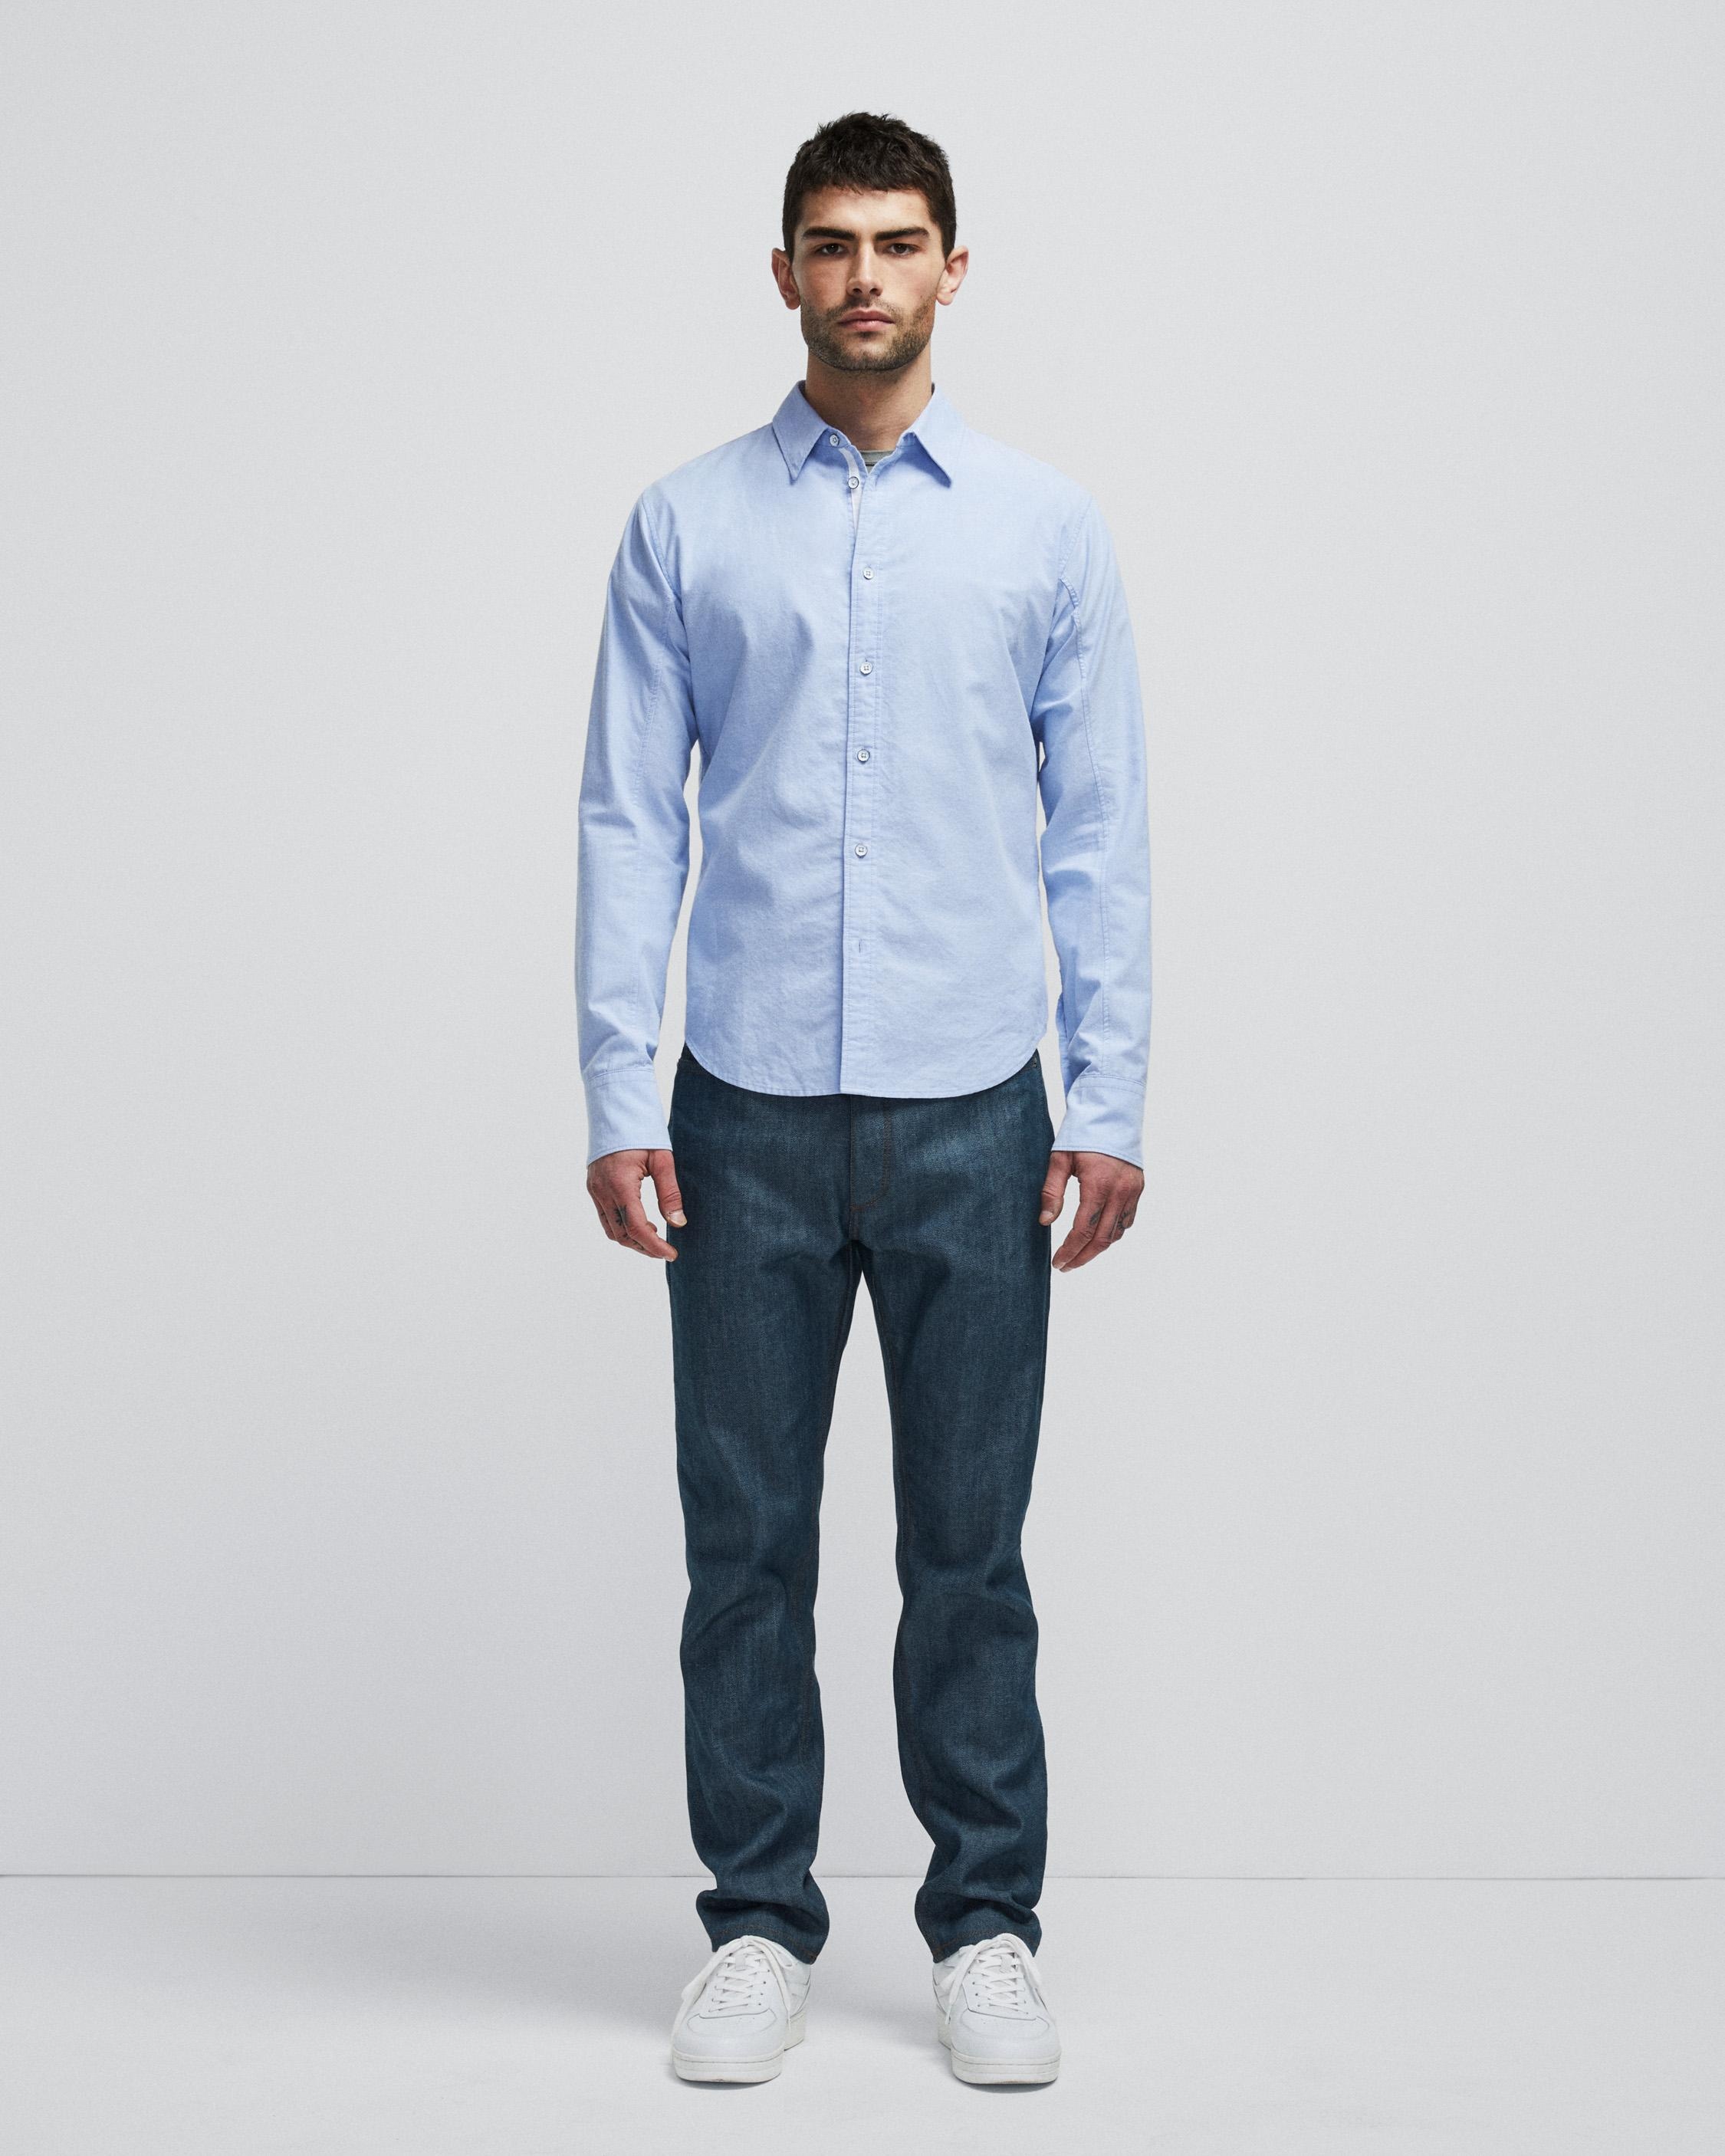 Fit 2 Engineered Cotton Oxford Shirt
Slim Fit Shirt - 2